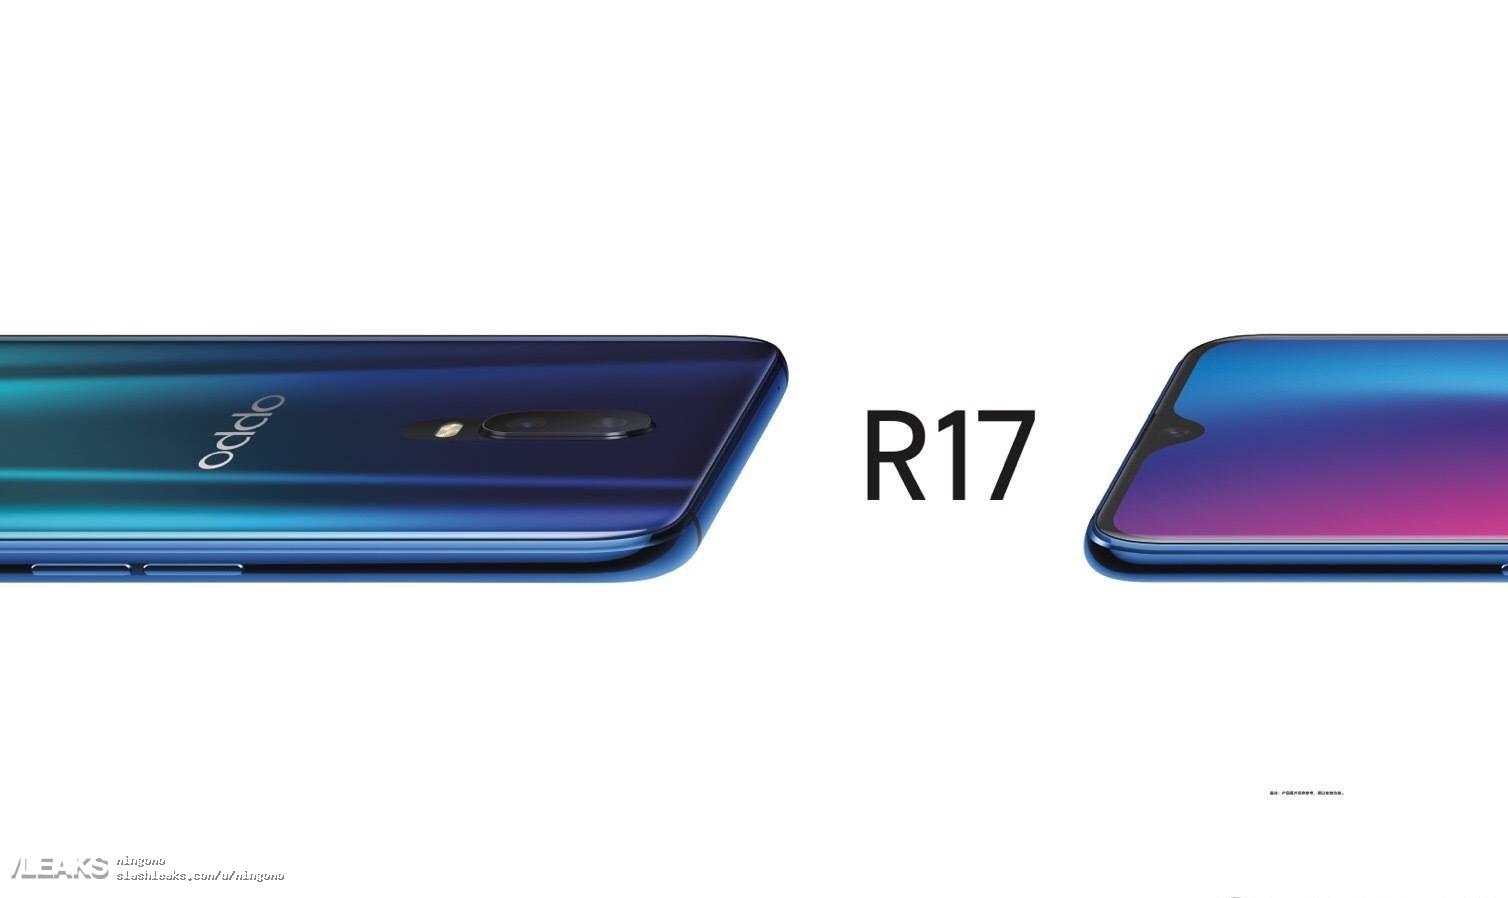 Oppo R17 With 6.4-Inch Display, In-Display Fingerprint Sensor Goes Official